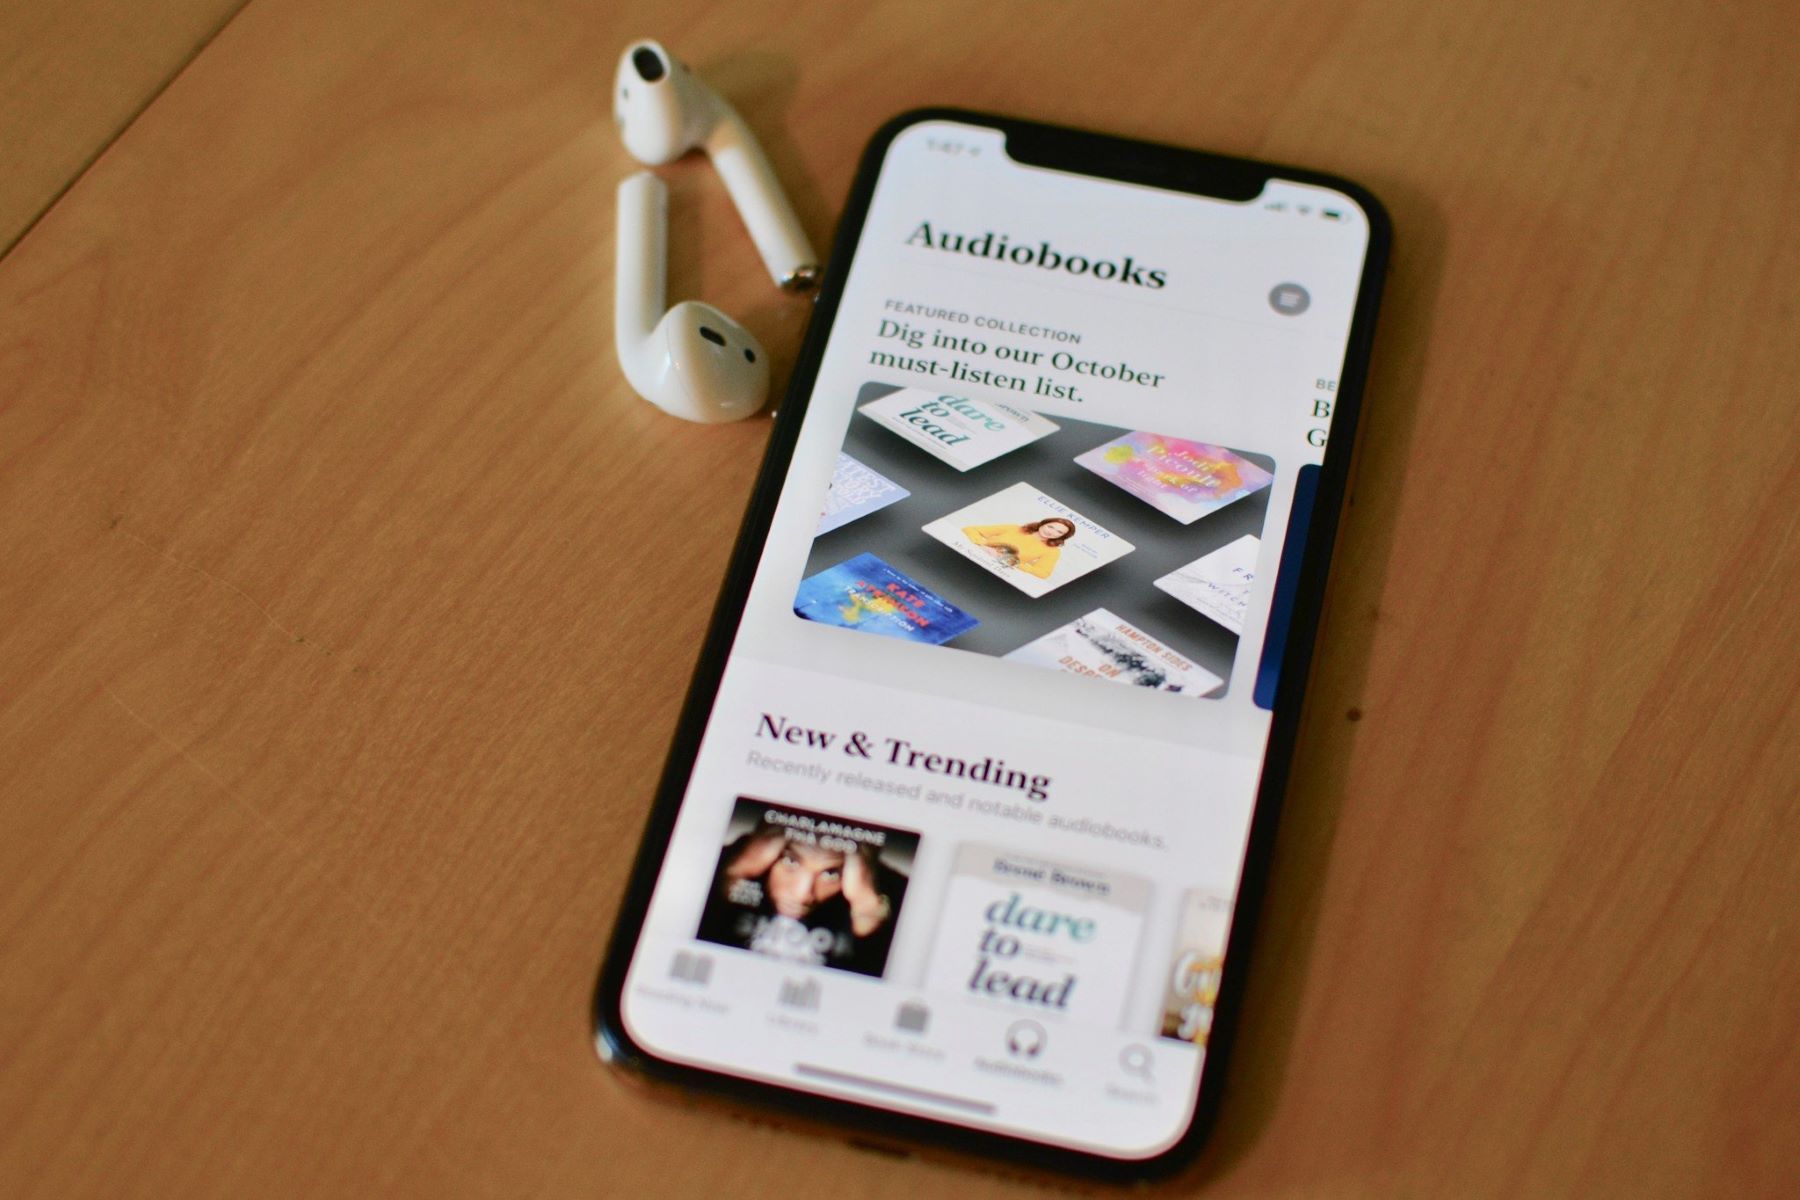 How To Add Audiobook To IPhone